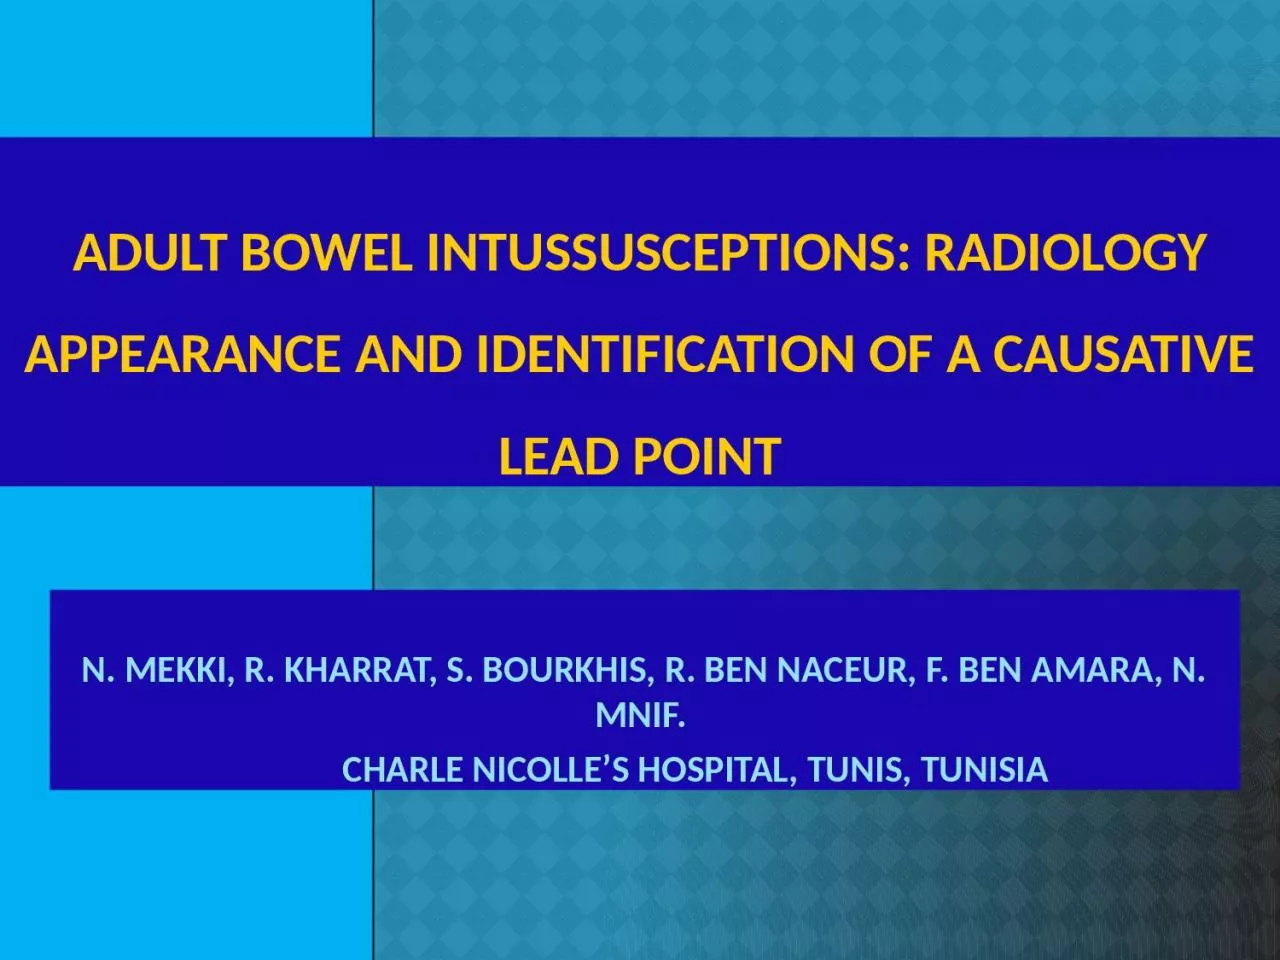 ADULT BOWEL INTUSSUSCEPTIONS: RADIOLOGY